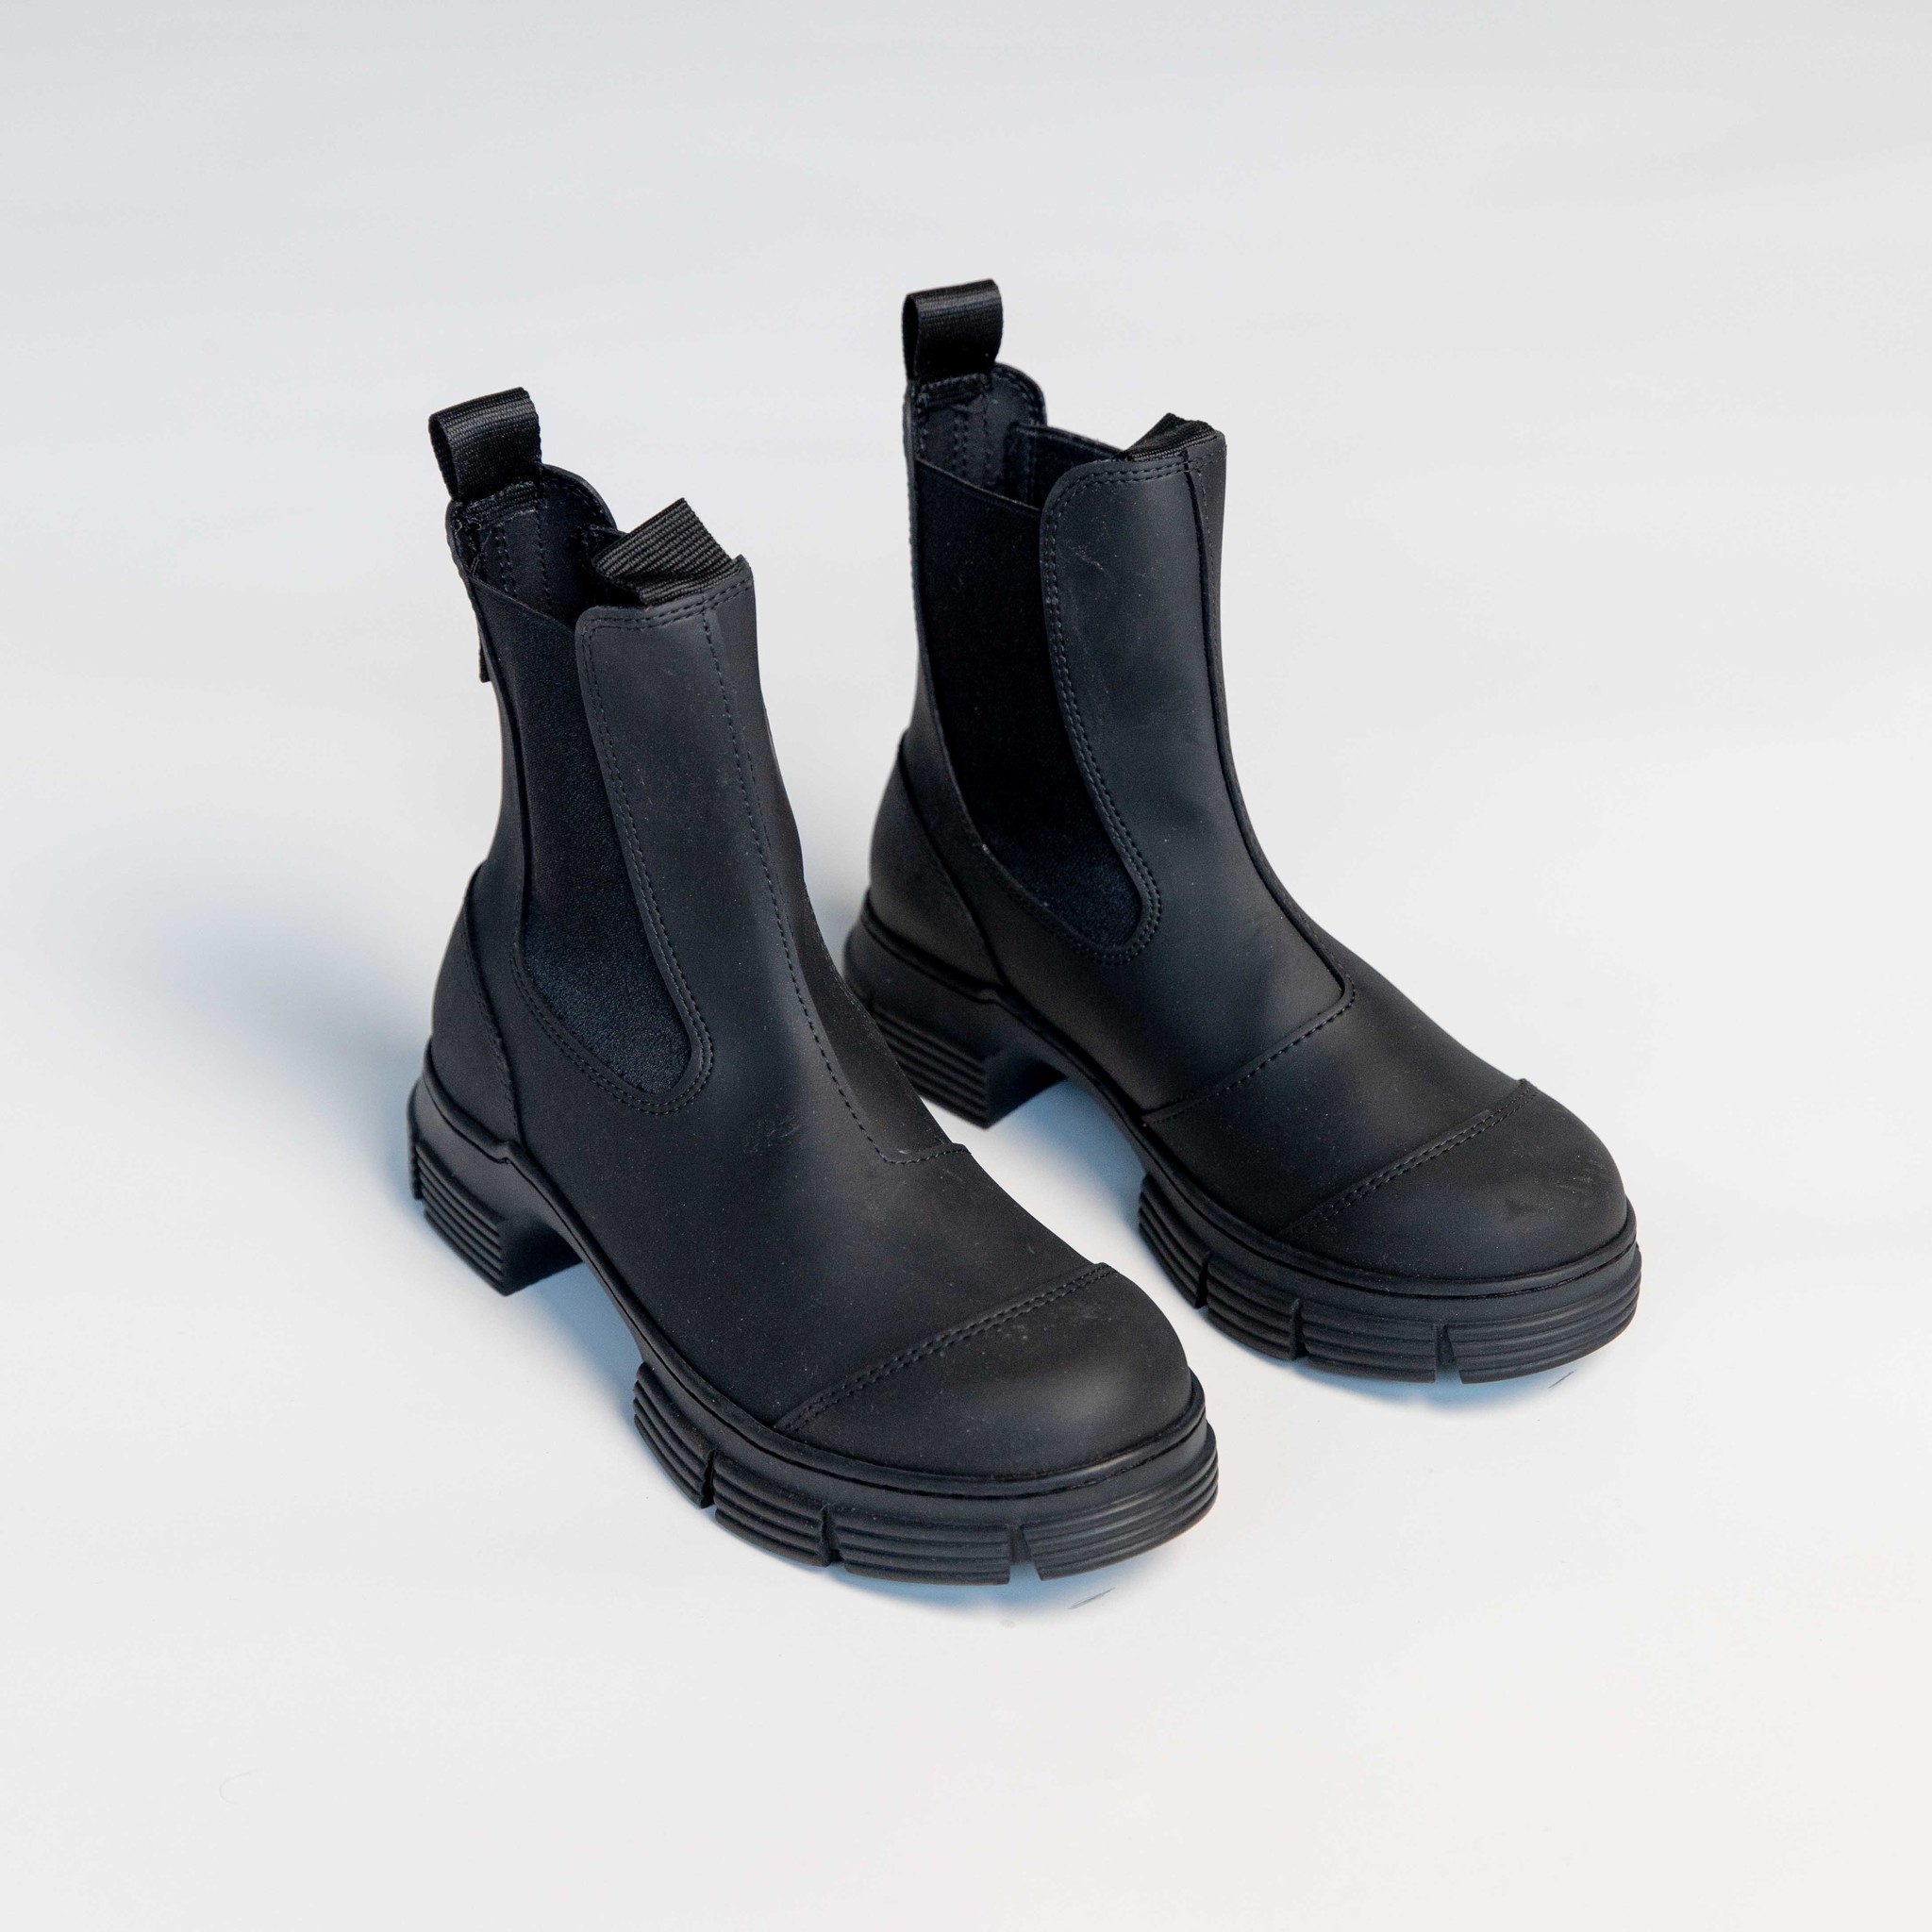 AMAILGANNI Recycled Rubber City Boot